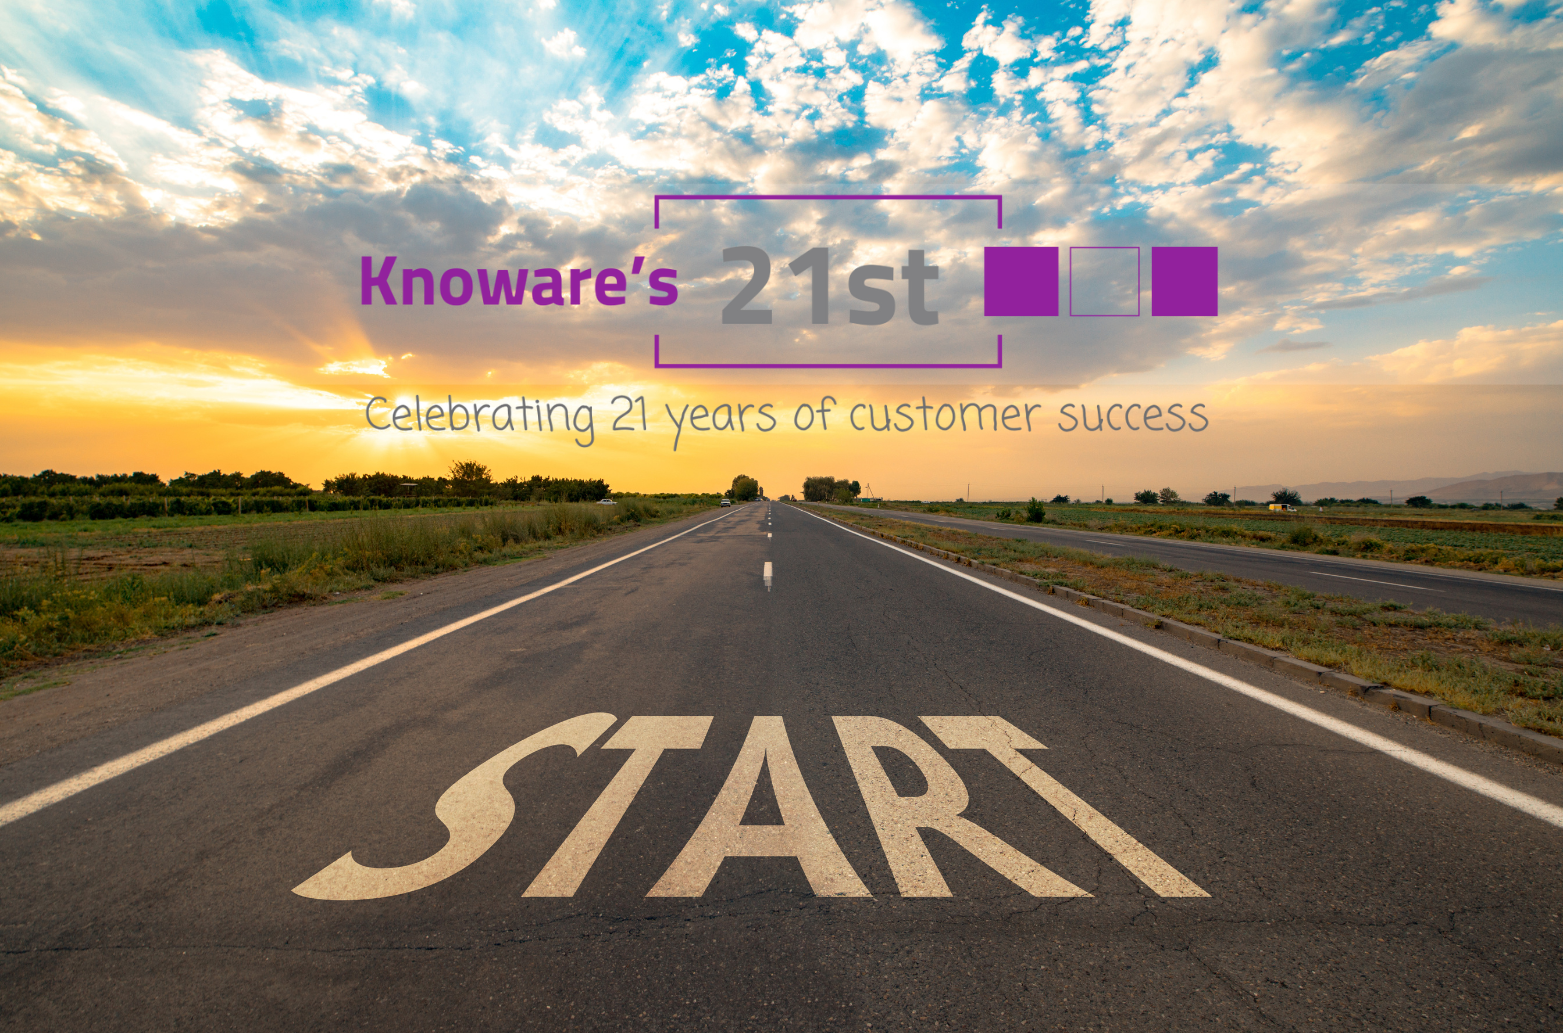 CREATING KNOWARE PT 1 – REFLECTIONS FROM CLARE SOMERVILLE [ONE OF KNOWARE’S FOUNDERS] – THE BEGINNING